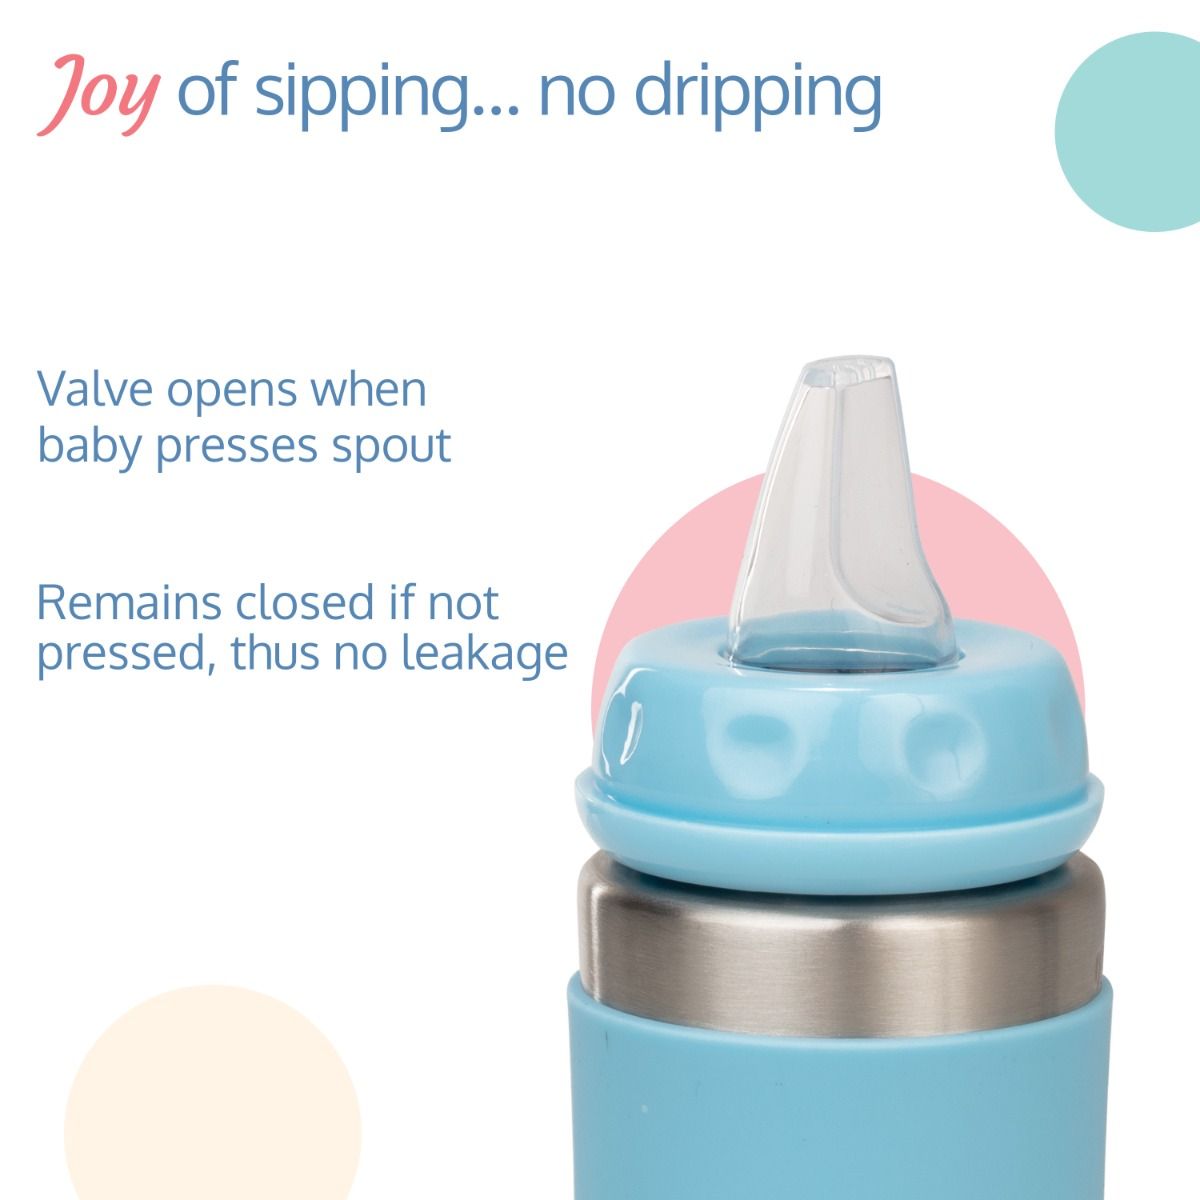 LuvLap 4-in-1 Stainless Steel Baby Bottle/Sipper SS304, Anti-Colic, Odor-Free, with Handles 19422 - 240ml- SkyBlue